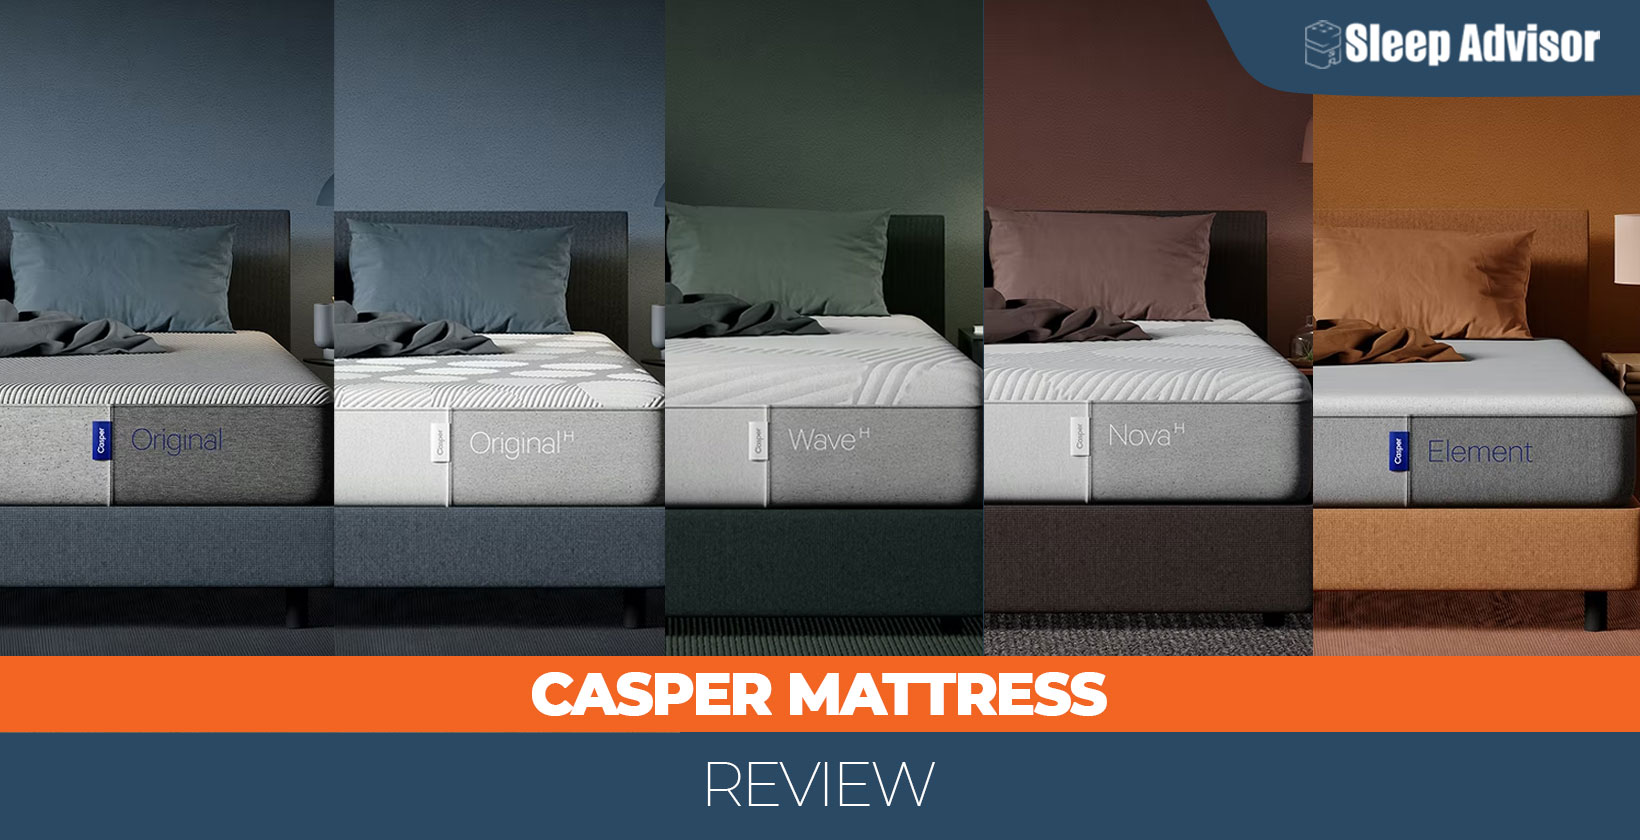 Casper Mattress Review and Prices